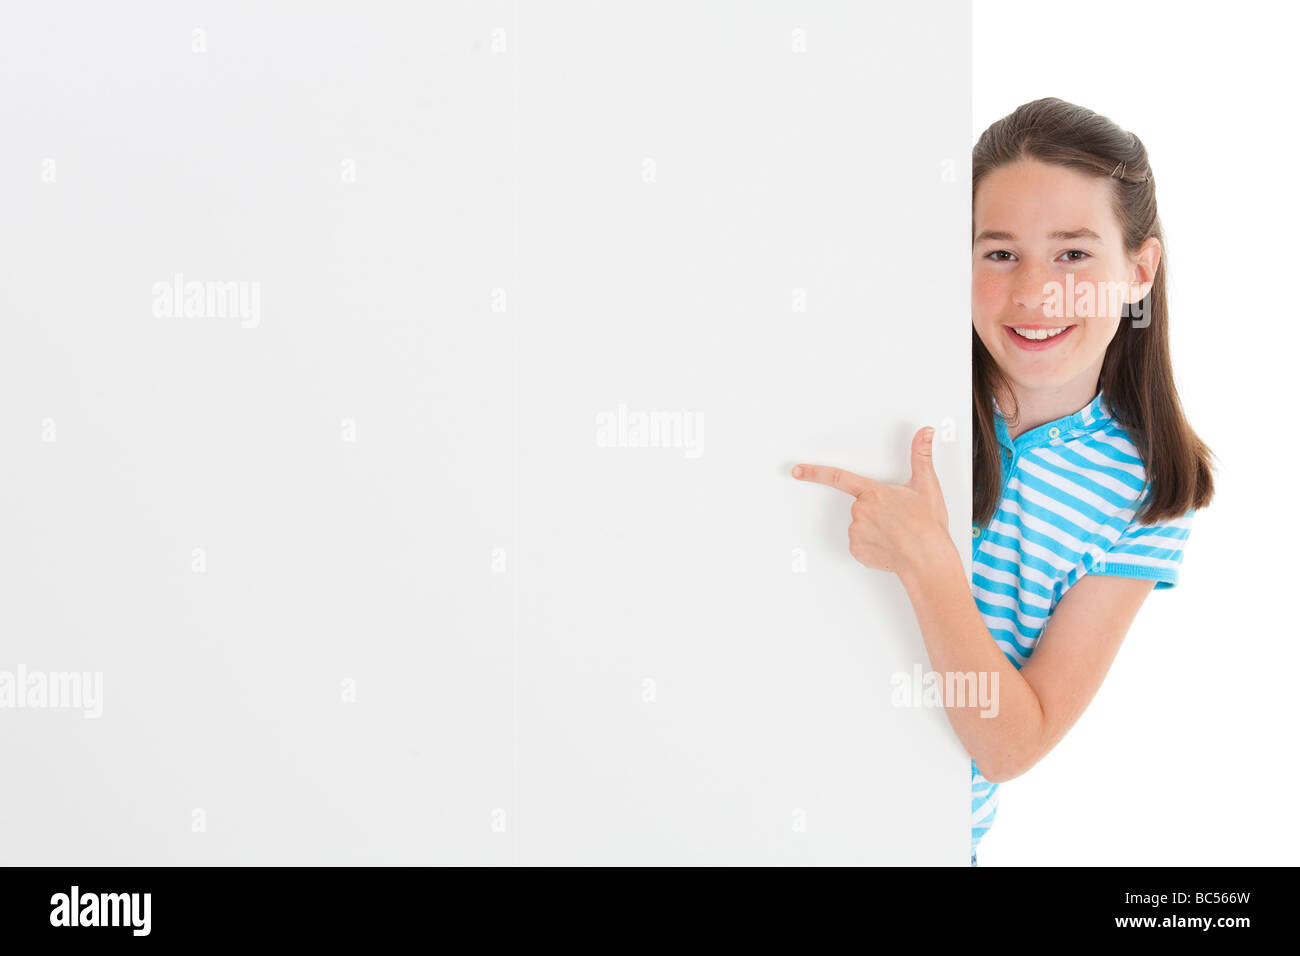 Cute Caucasian girl holding a blank sign Stock Photo